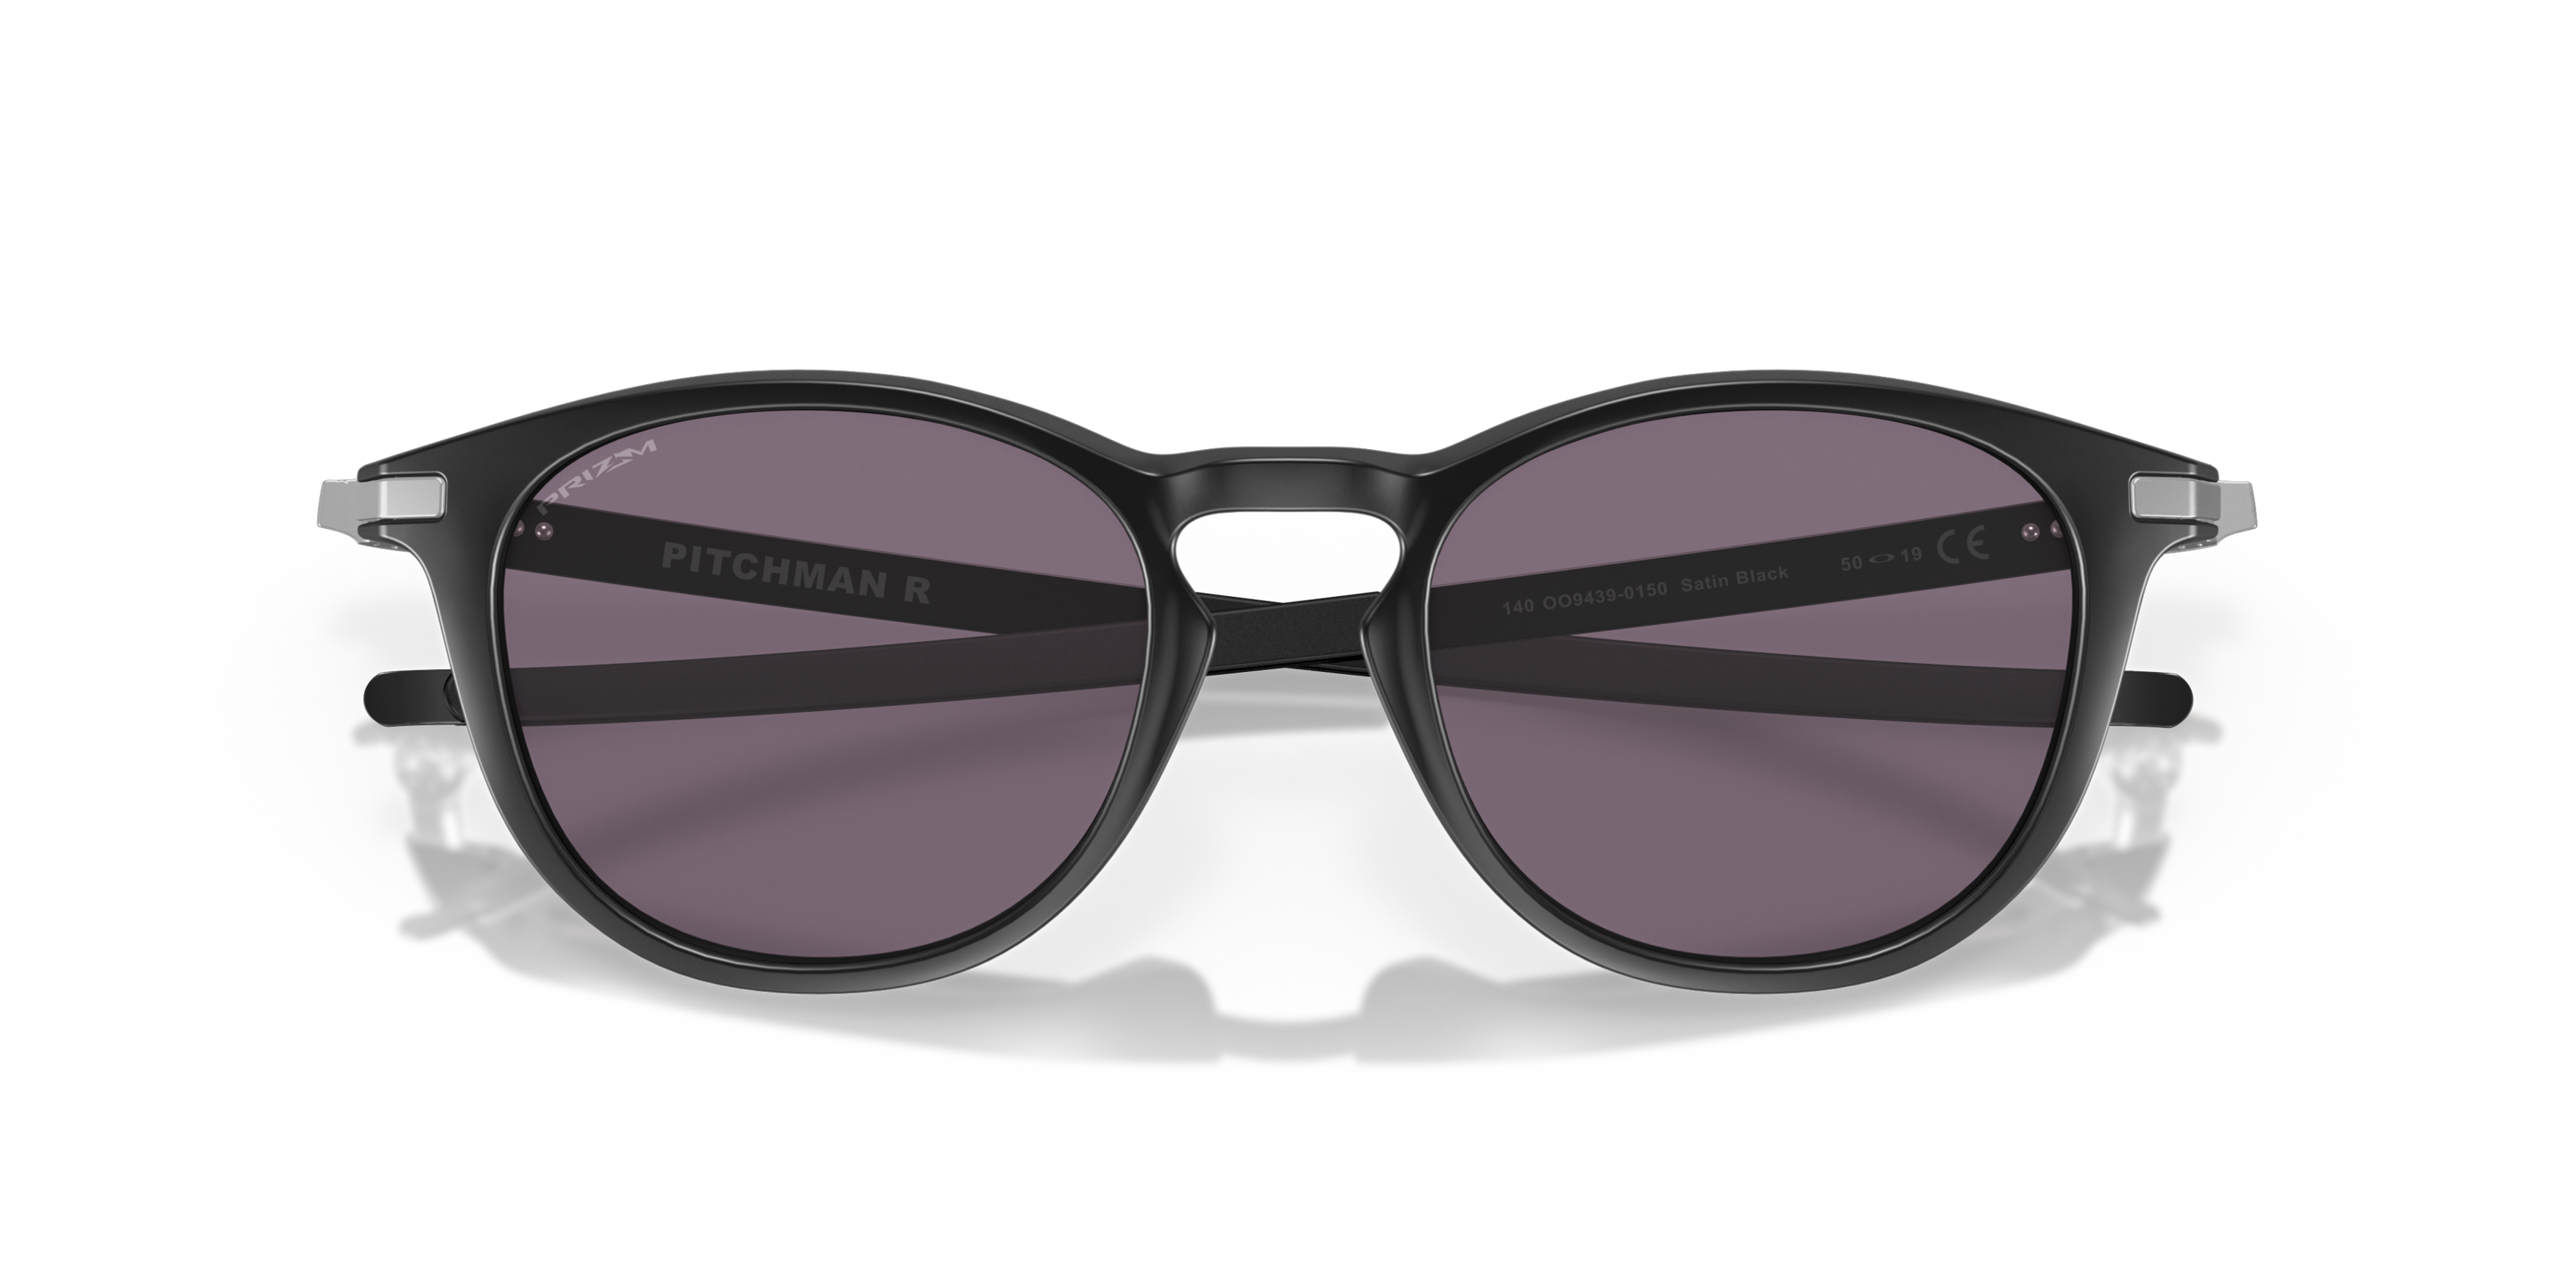 [products.image.folded] Oakley 0OO9439 943901